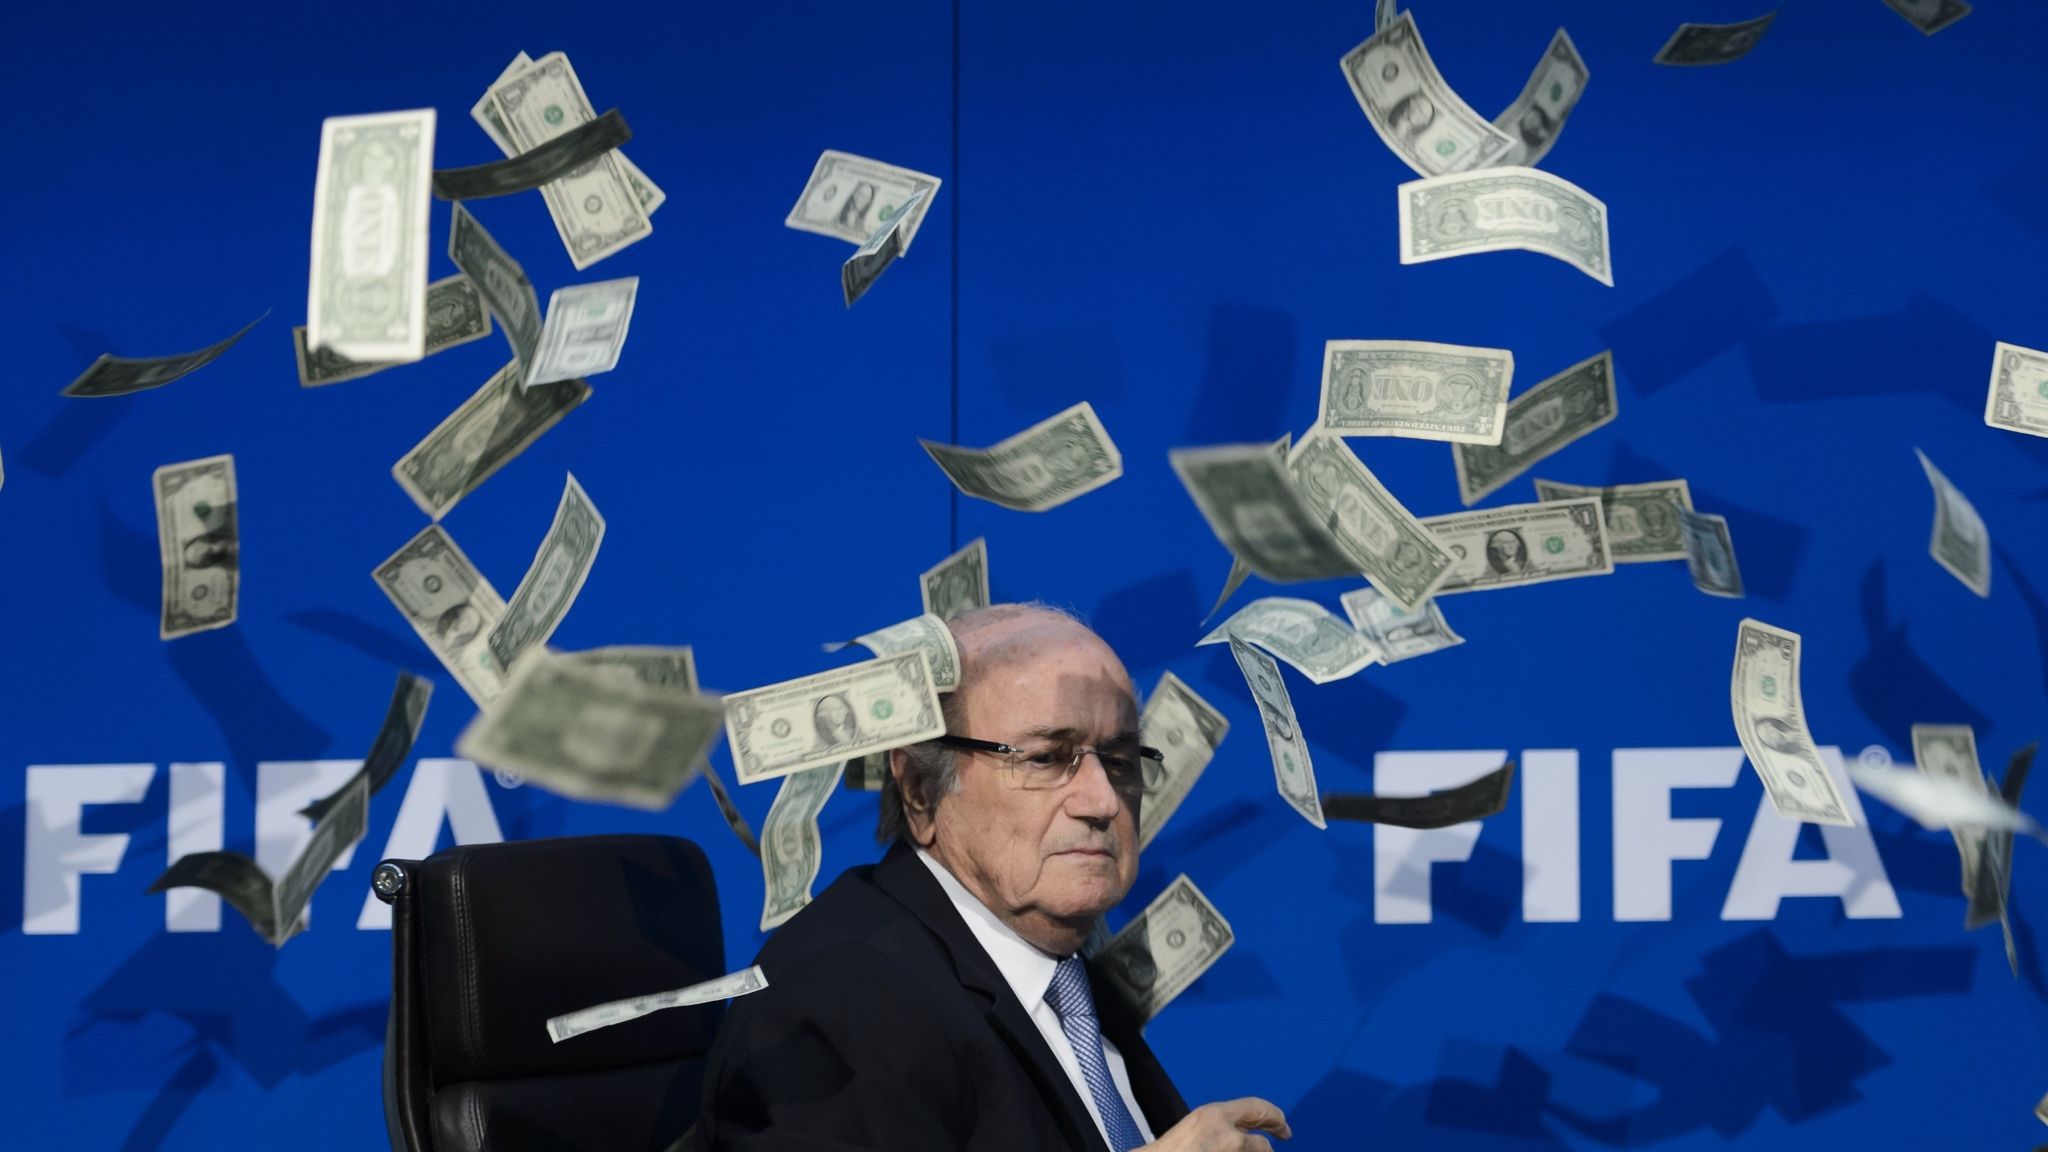 Sepp Blatter has money thrown at him at FIFA news conference in Zurich |  Football News | Sky Sports